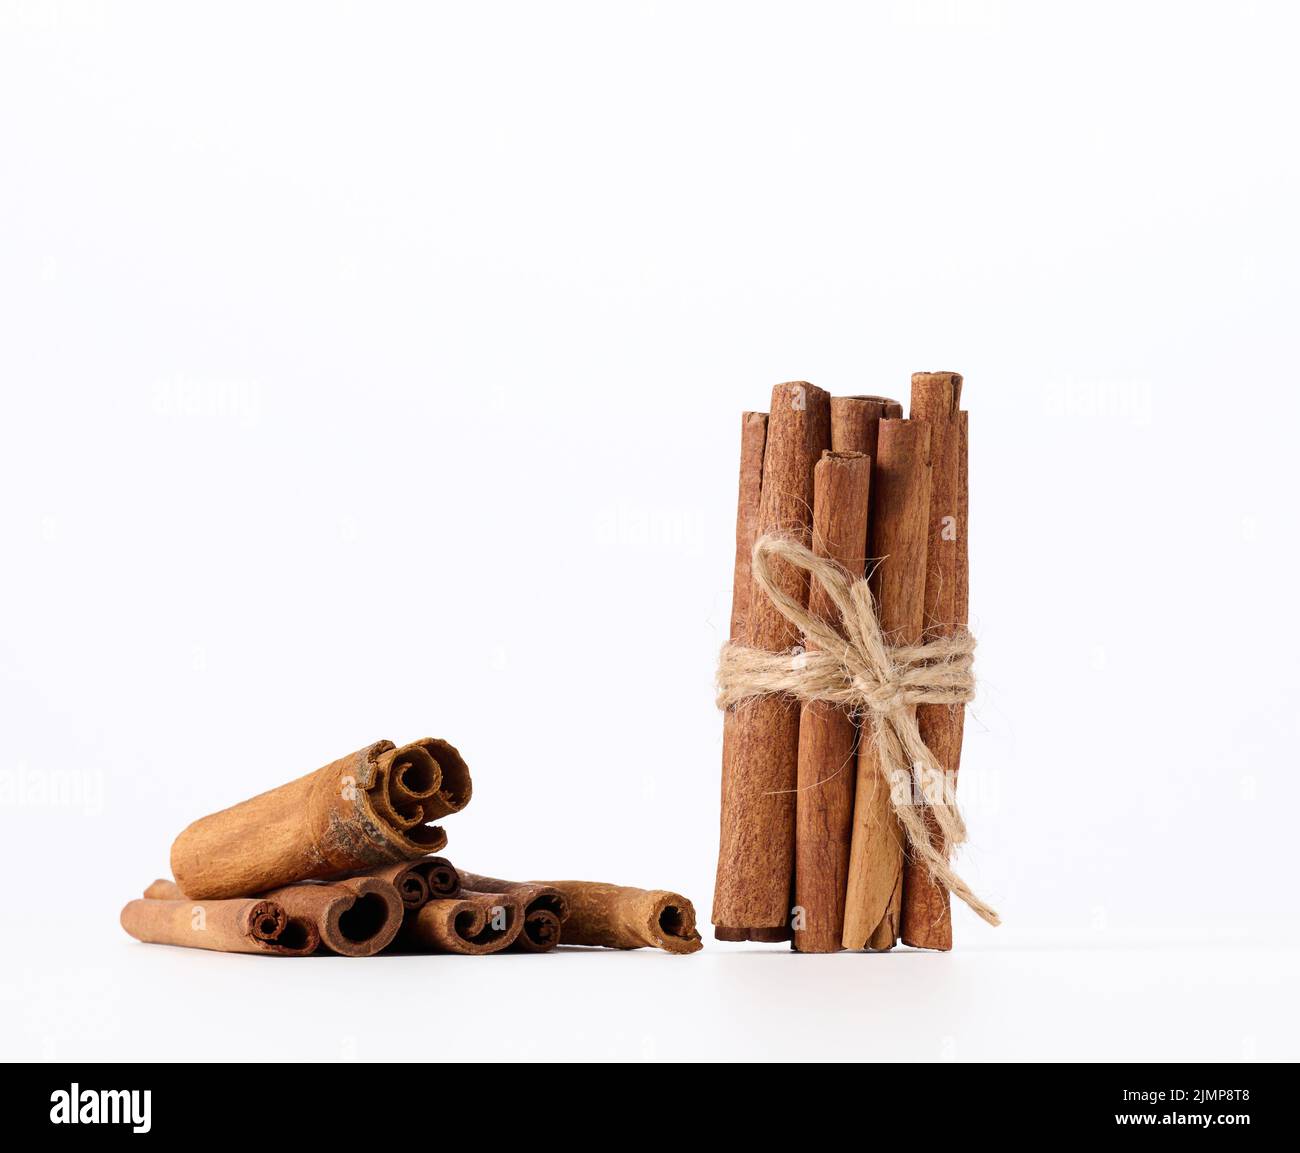 Dry cinnamon sticks tied with a rope on a white background Stock Photo